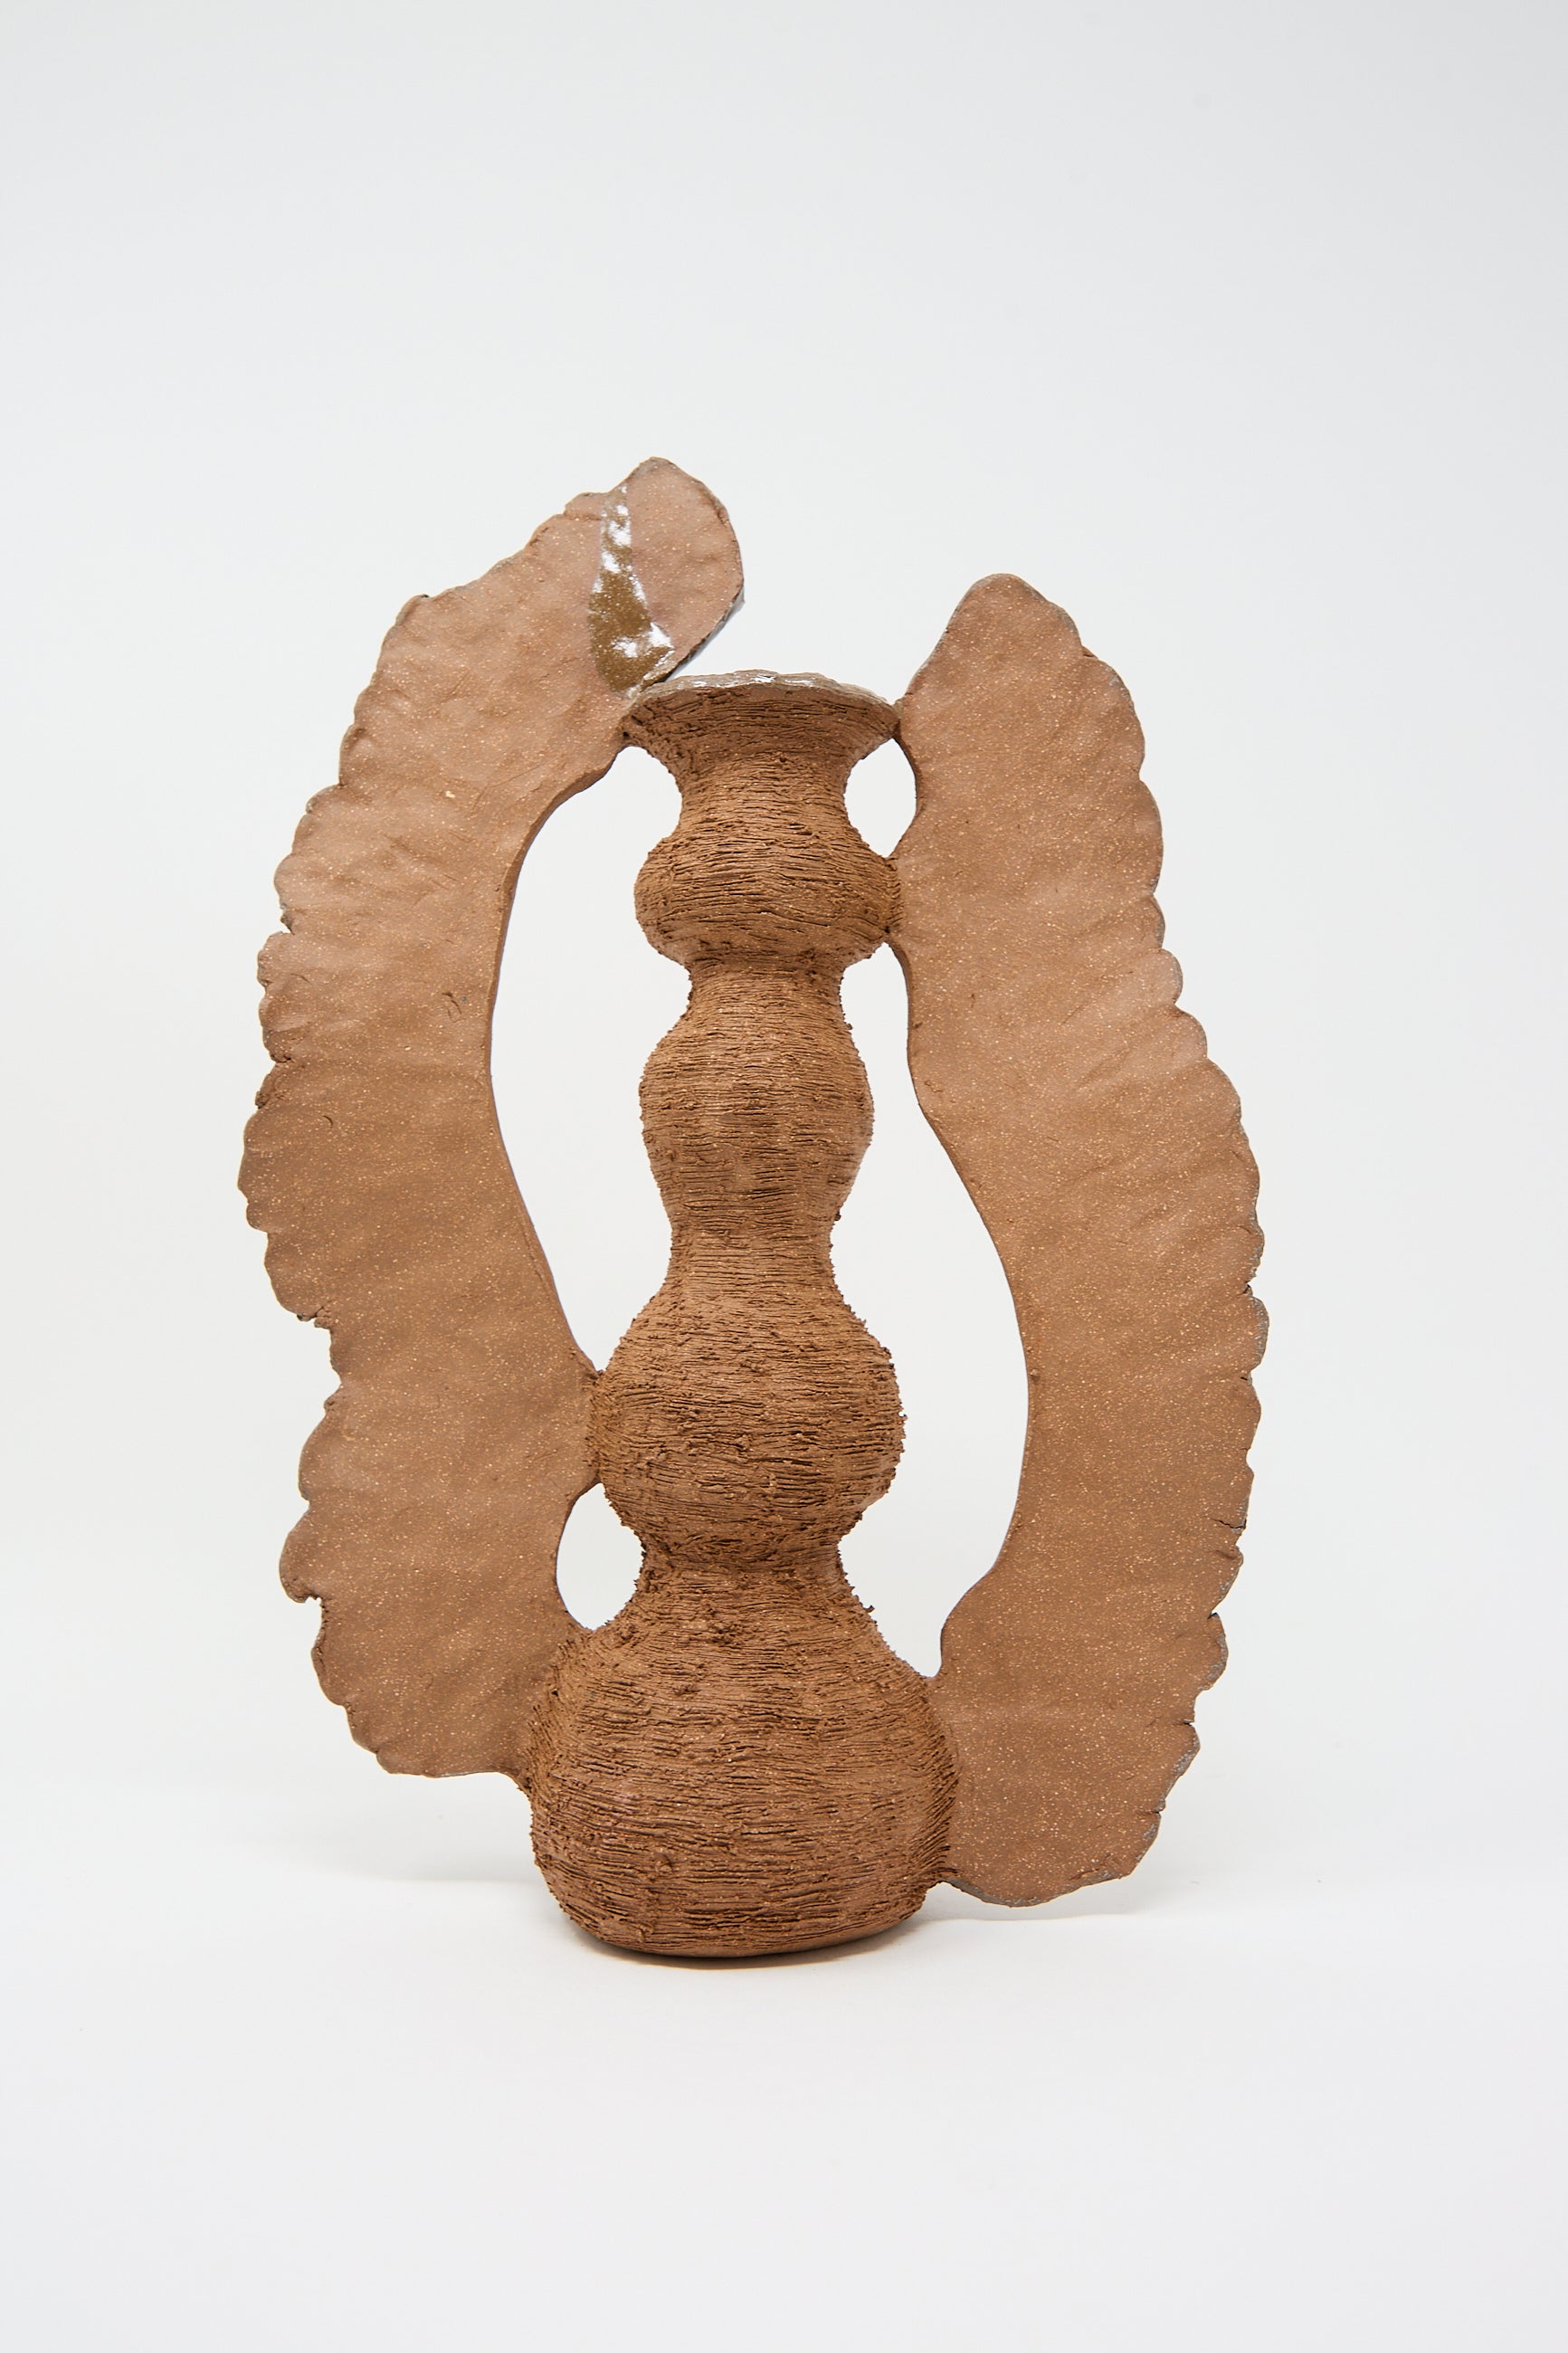 A textured, hand-built red stoneware vase with an abstract design, featuring a central, curvy column flanked by two large, irregular wings, The Flying Ra Vase by Tania Whalen.